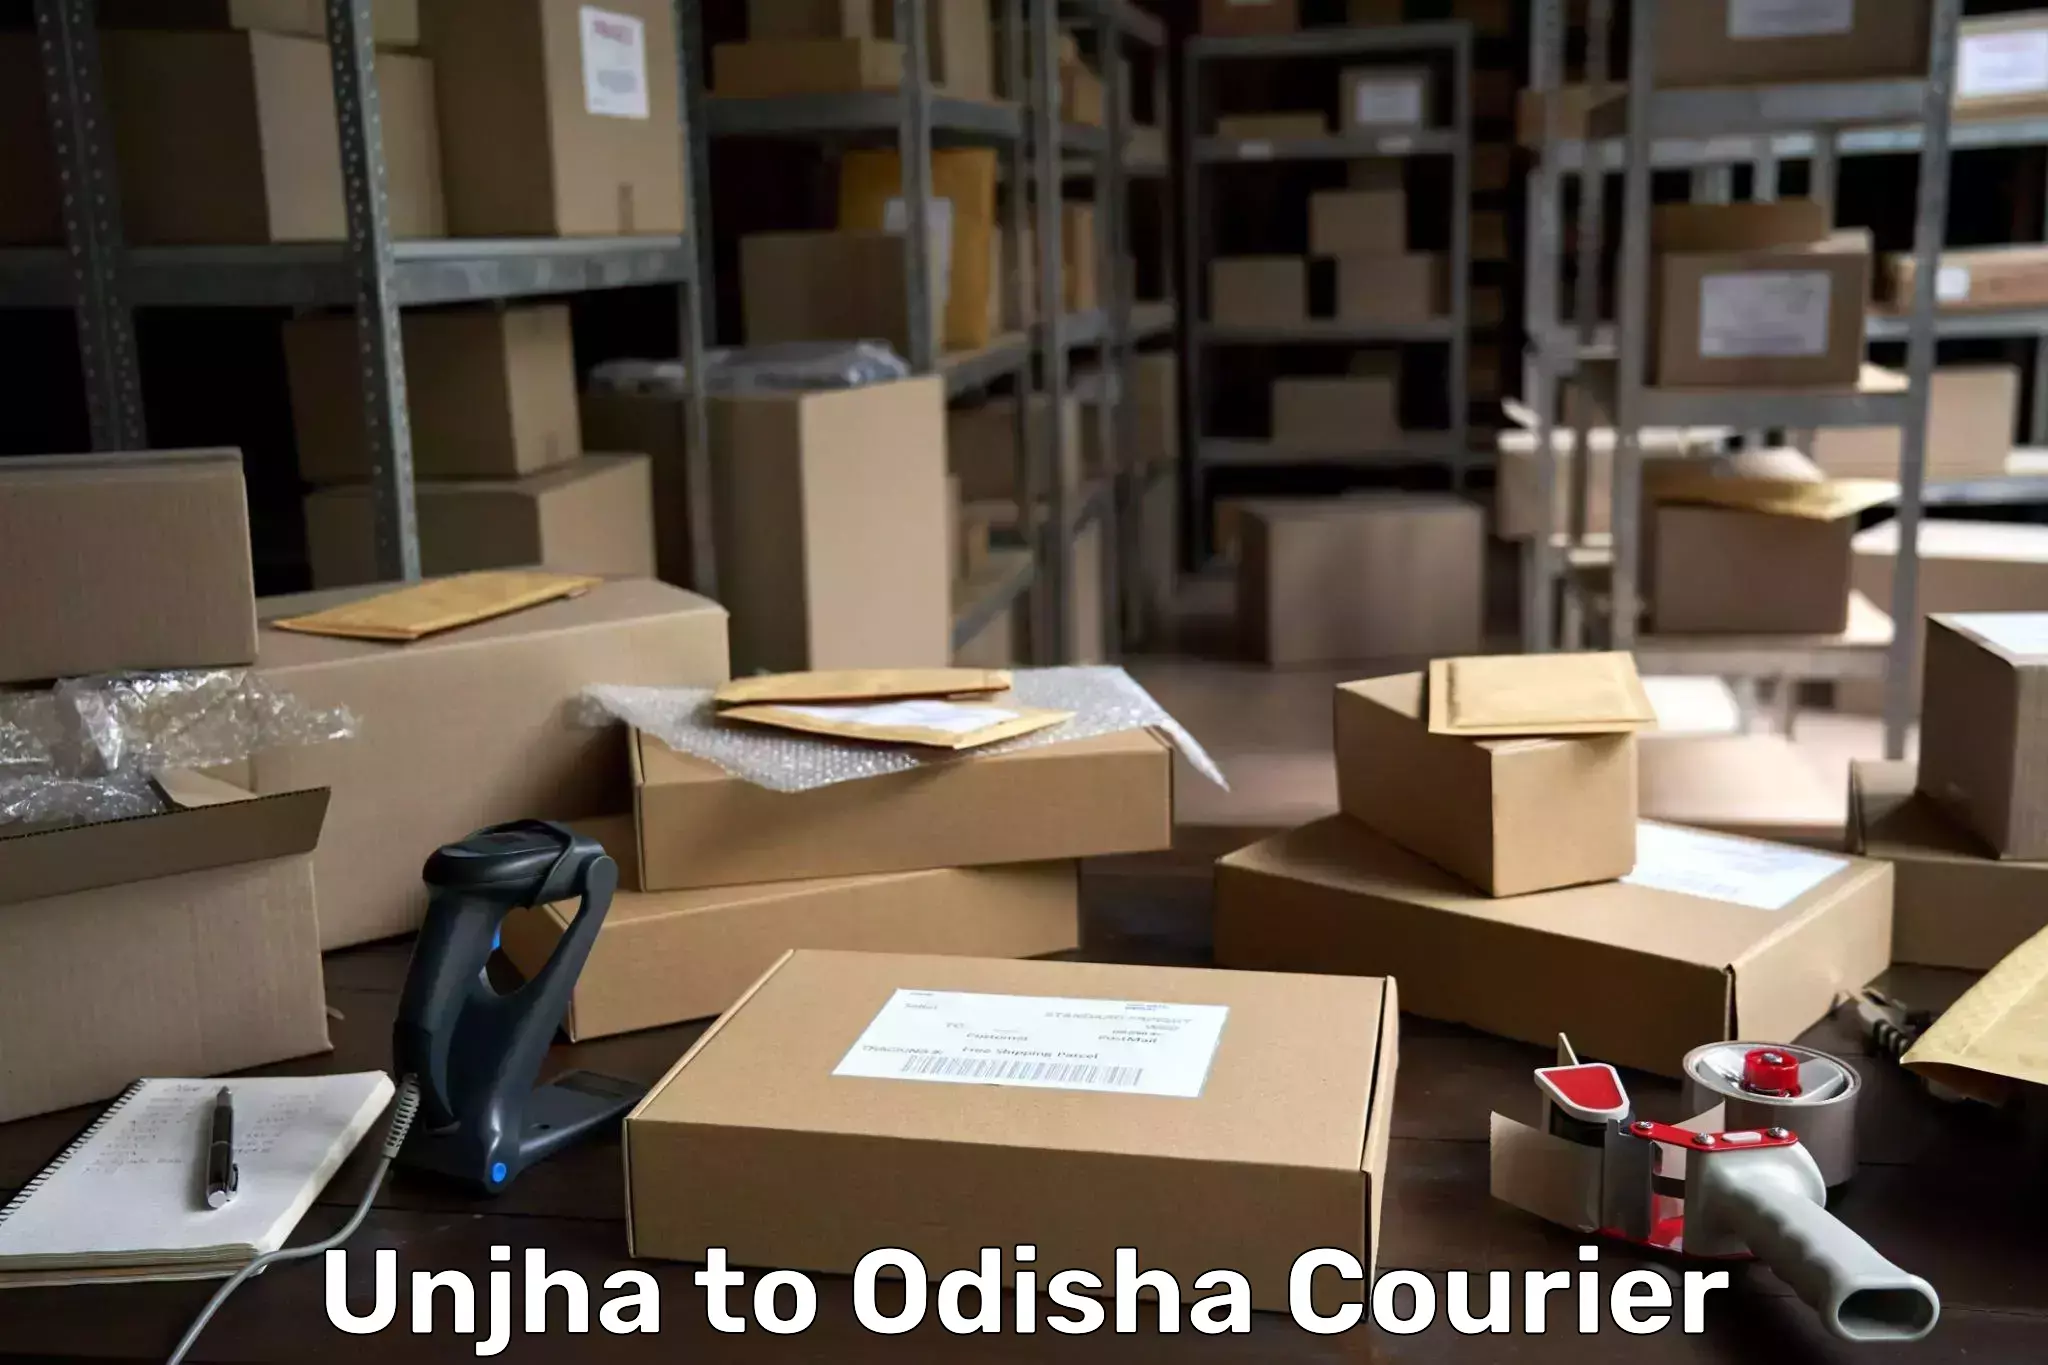 State-of-the-art courier technology Unjha to Odisha